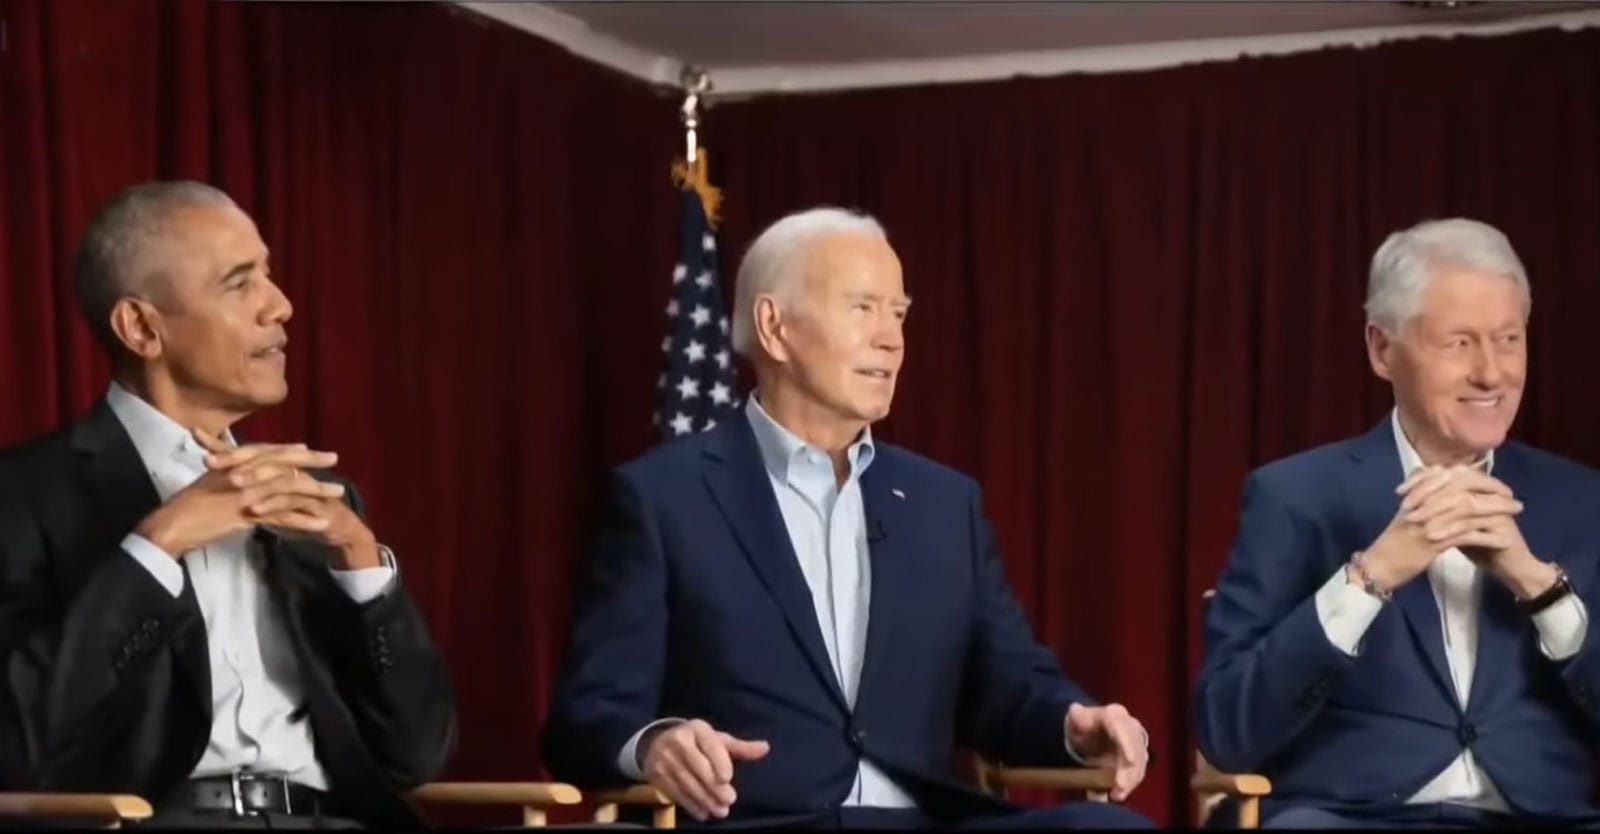 Presidents Obama, Biden and Clinton meet before a fundraiser at Radio City Music Hall; all are seated, in dark jackets and shirts unbuttoned at the throat.